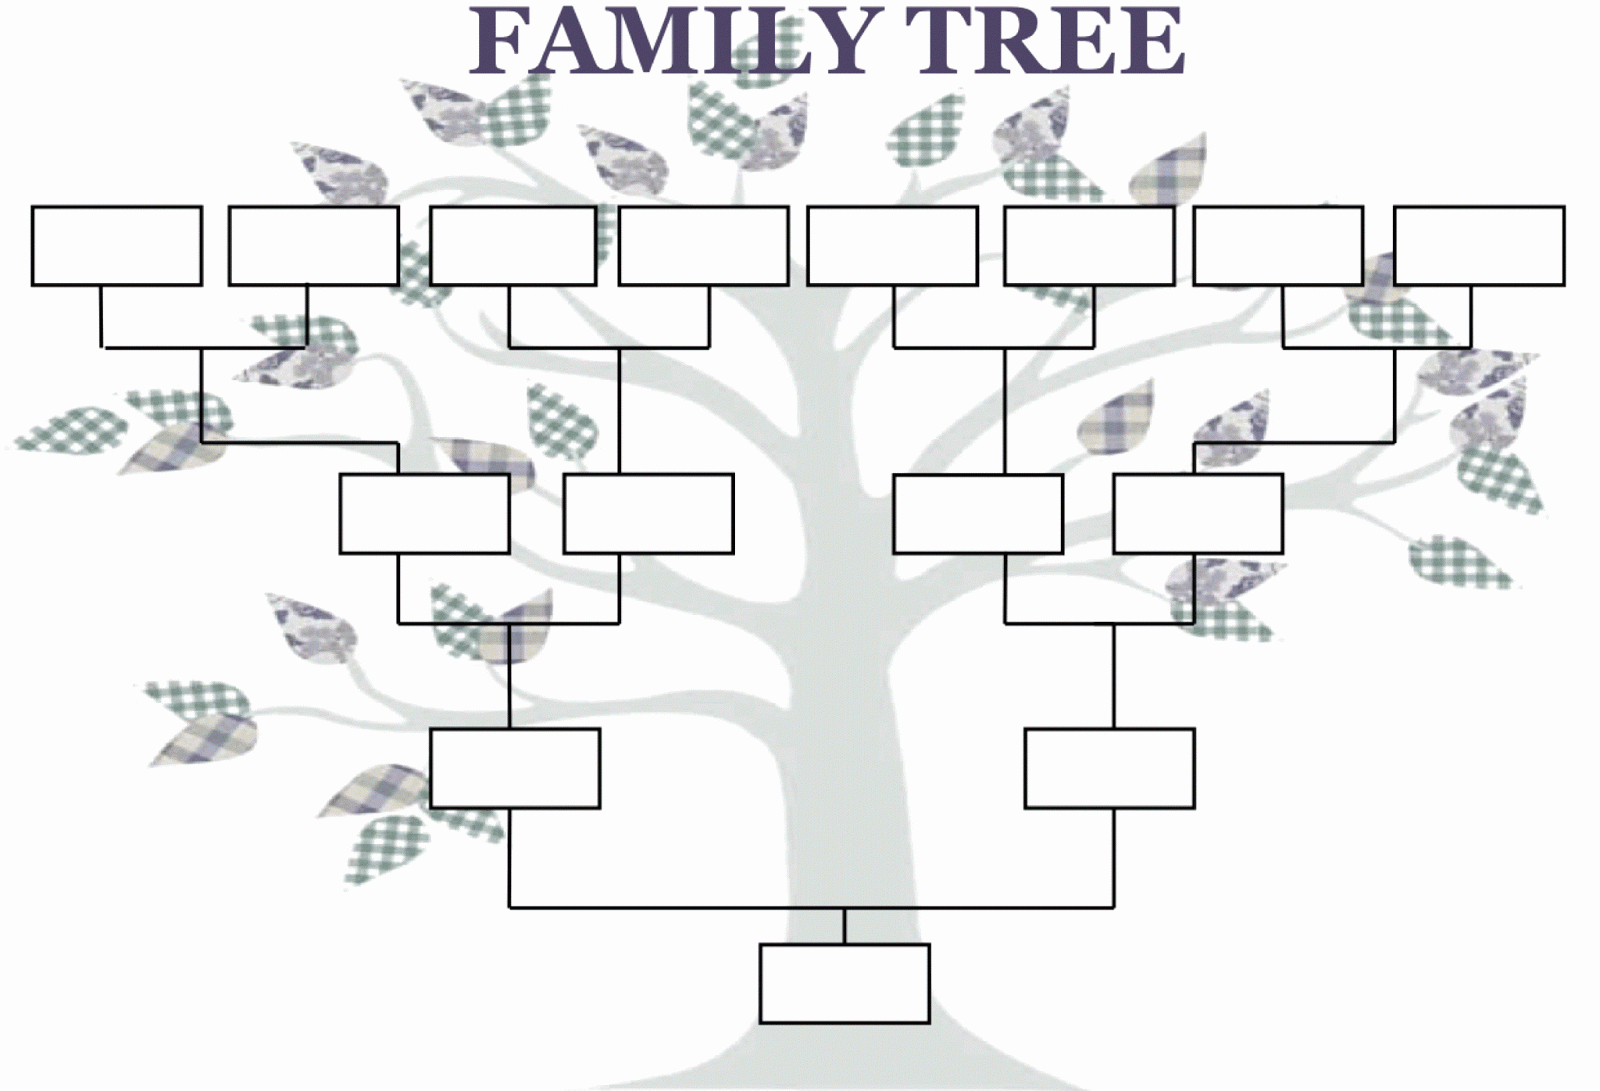 Family Ree Editable Generation Emplate Free | Wikiproverbs Throughout 3 Generation Family Tree Template Word